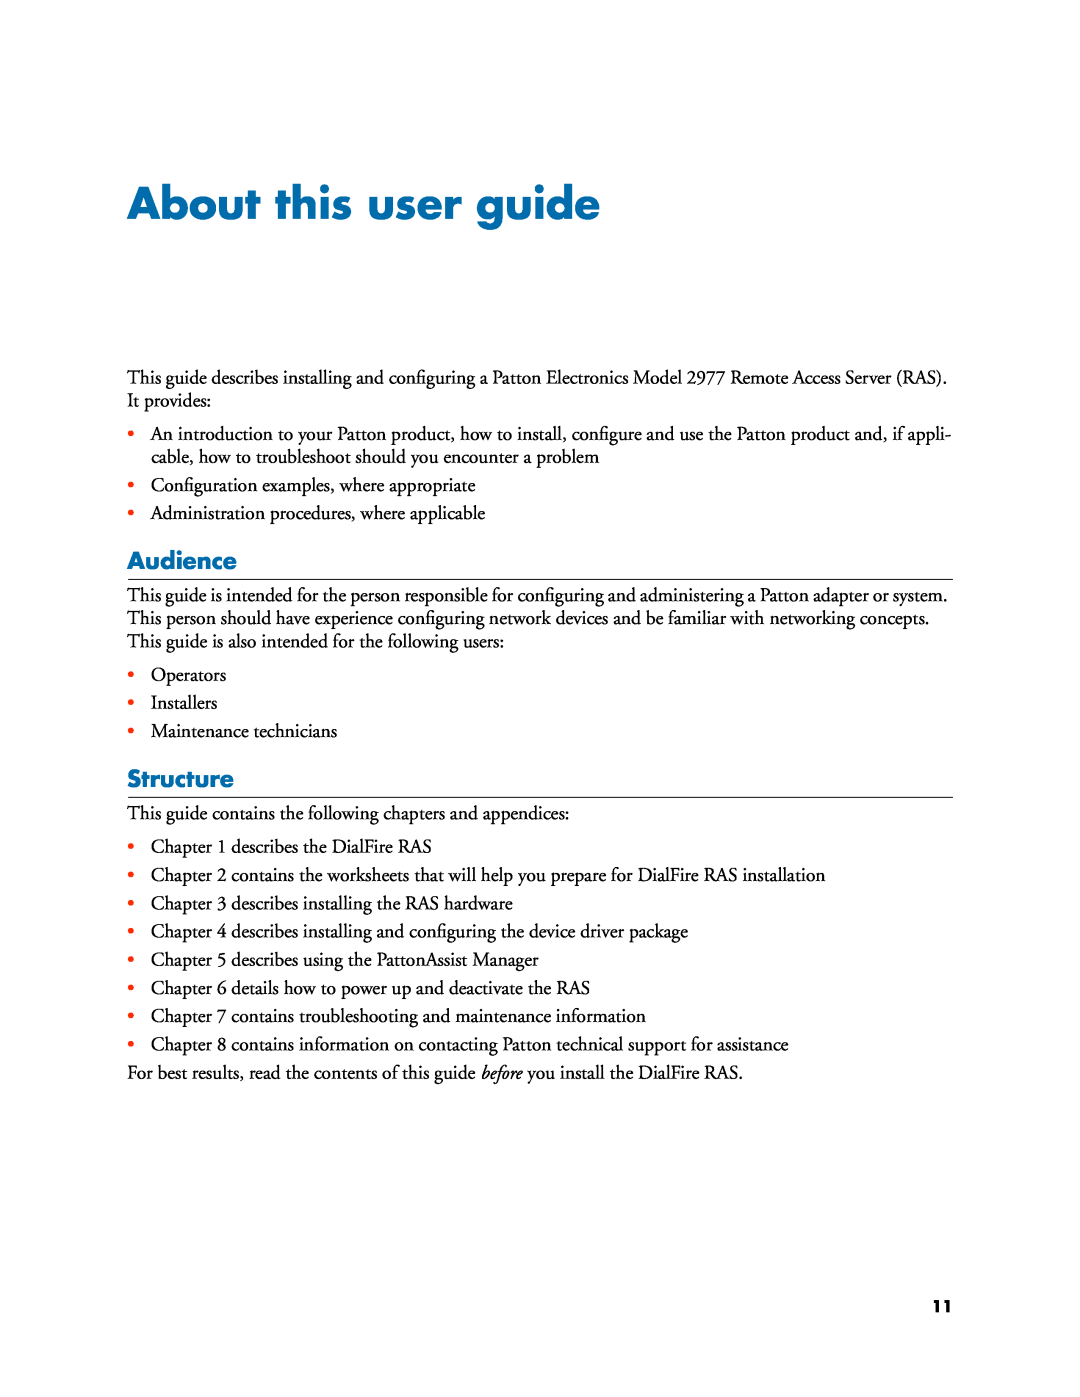 Patton electronic 2977 manual About this user guide, Audience, Structure 